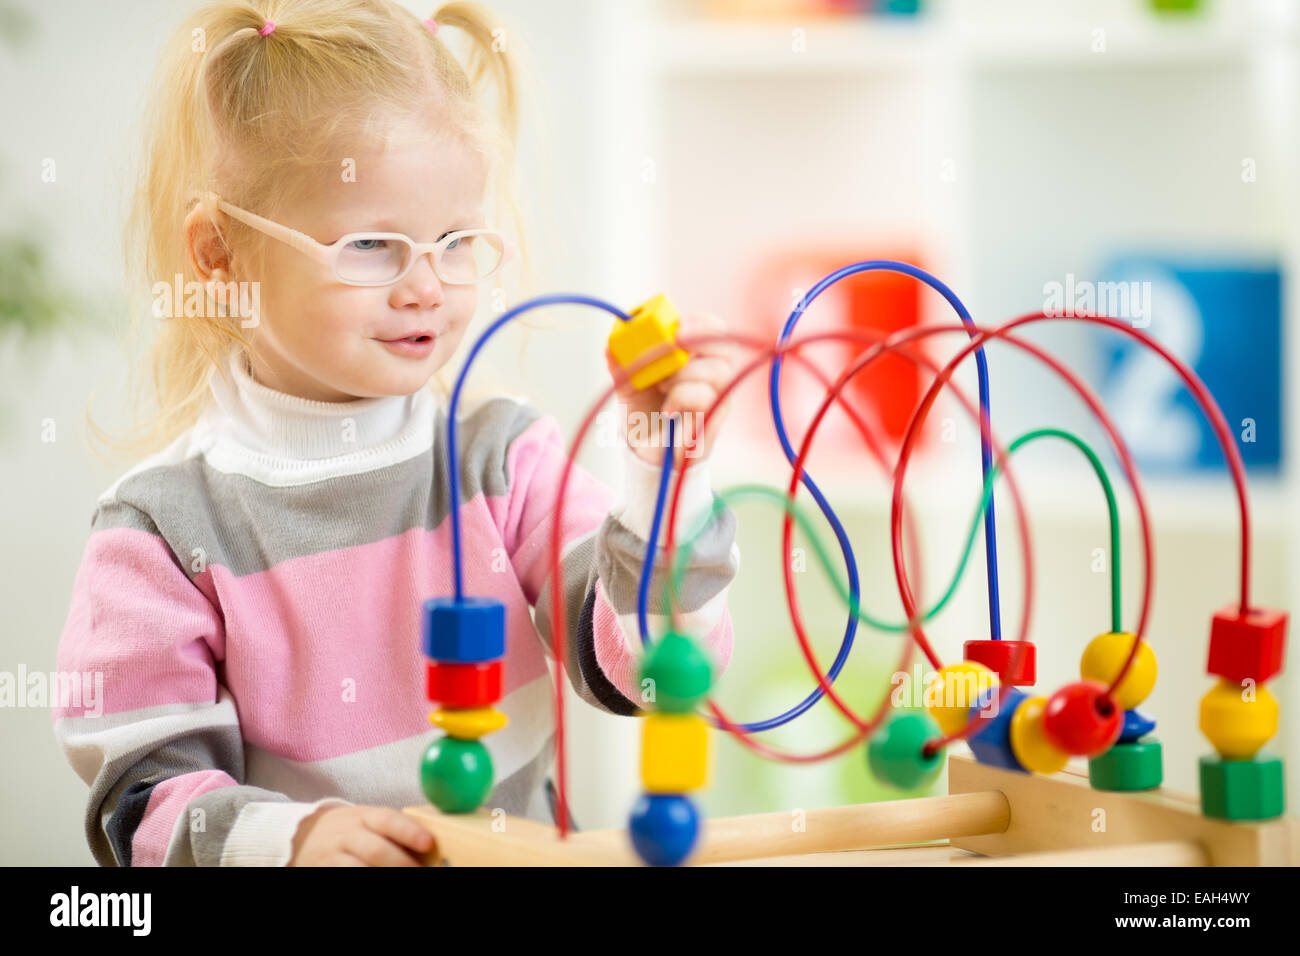 Kid in eyeglases playing colorful toy in home interior Stock Photo